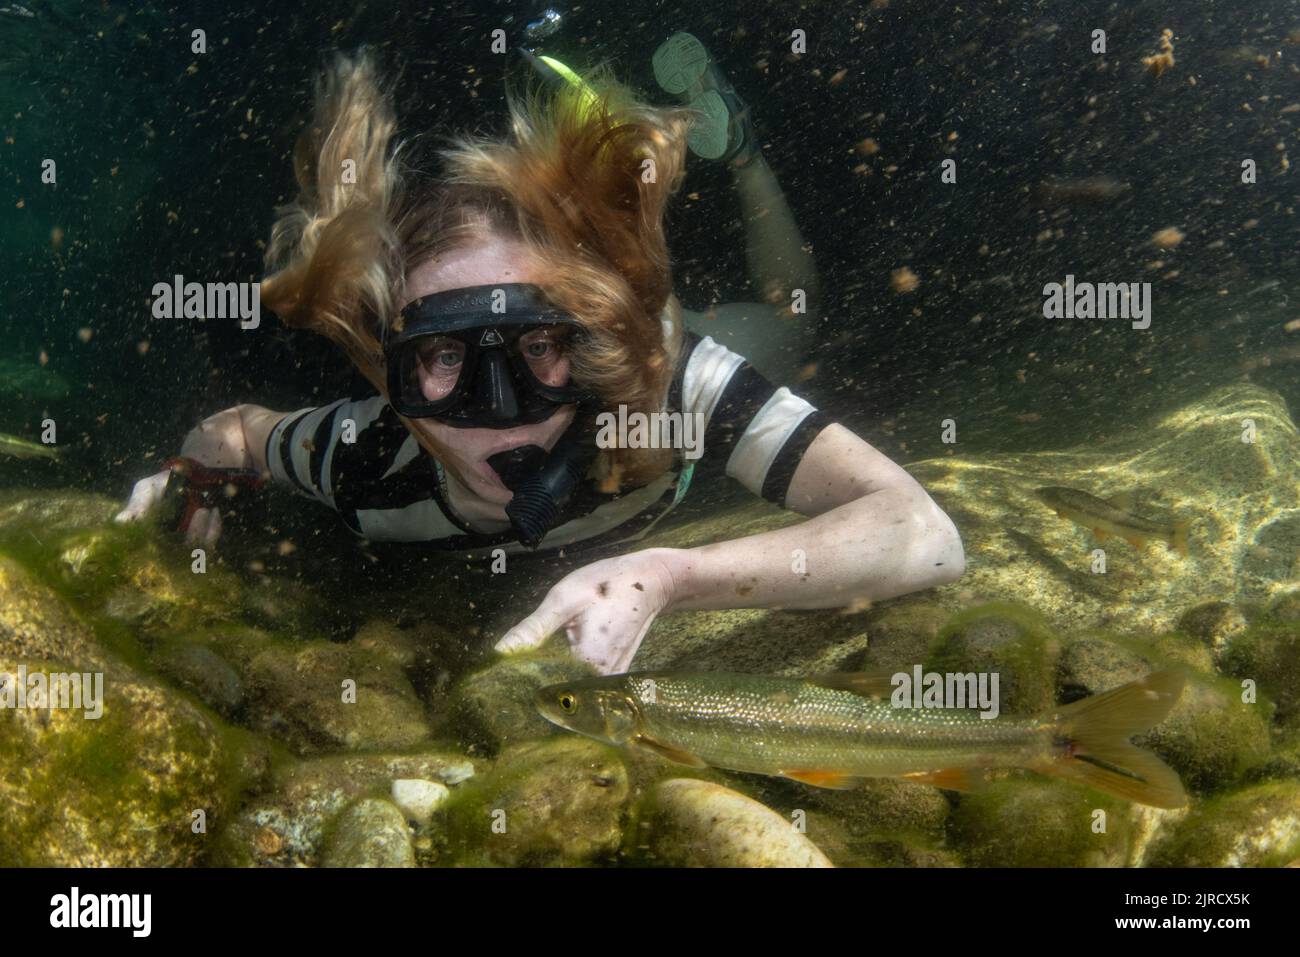 A female snorkeler in a river looking at fish, Sacramento pikeminnow (Ptychocheilus grandis), in a clean river in California, USA. Stock Photo